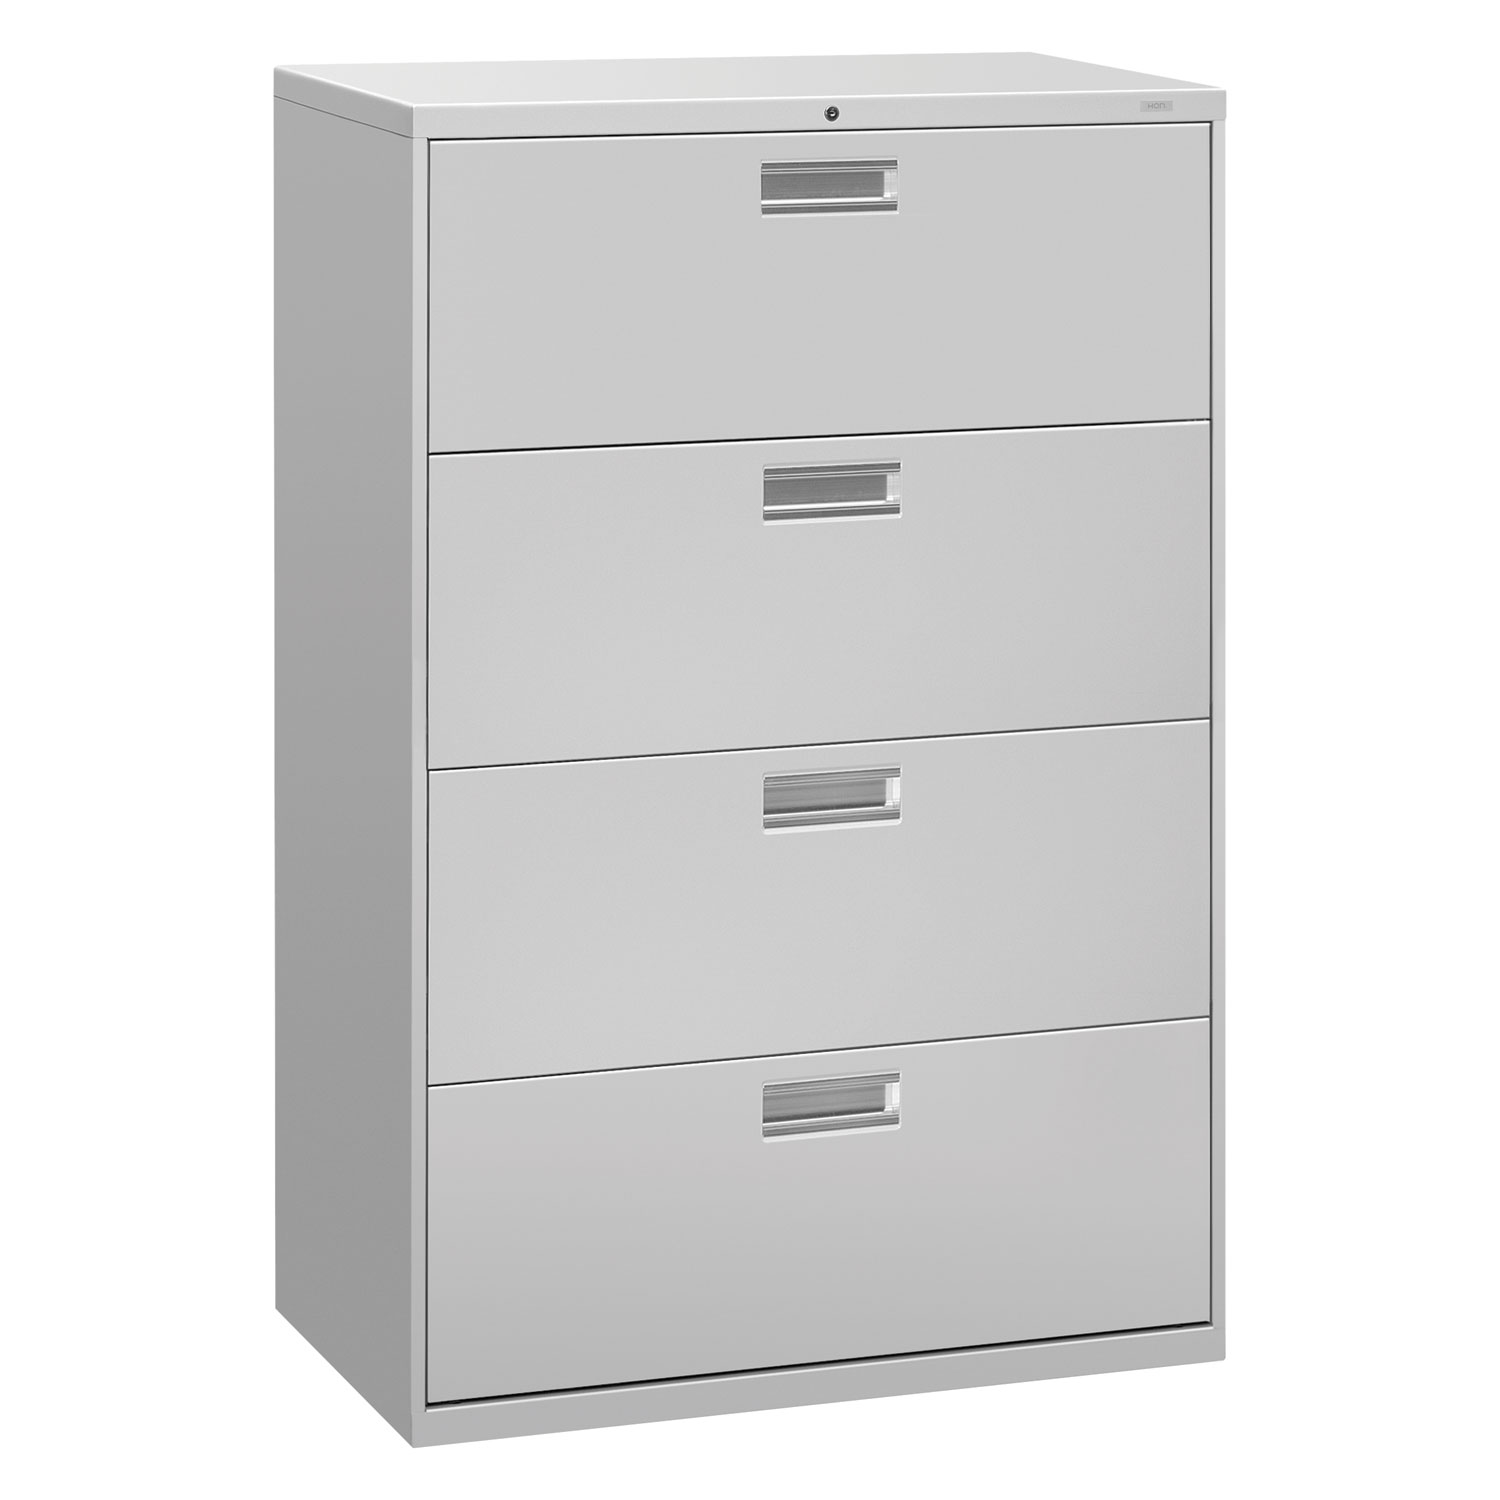 600 Series Four-Drawer Lateral File, 36w x 19-1/4d, Light Gray